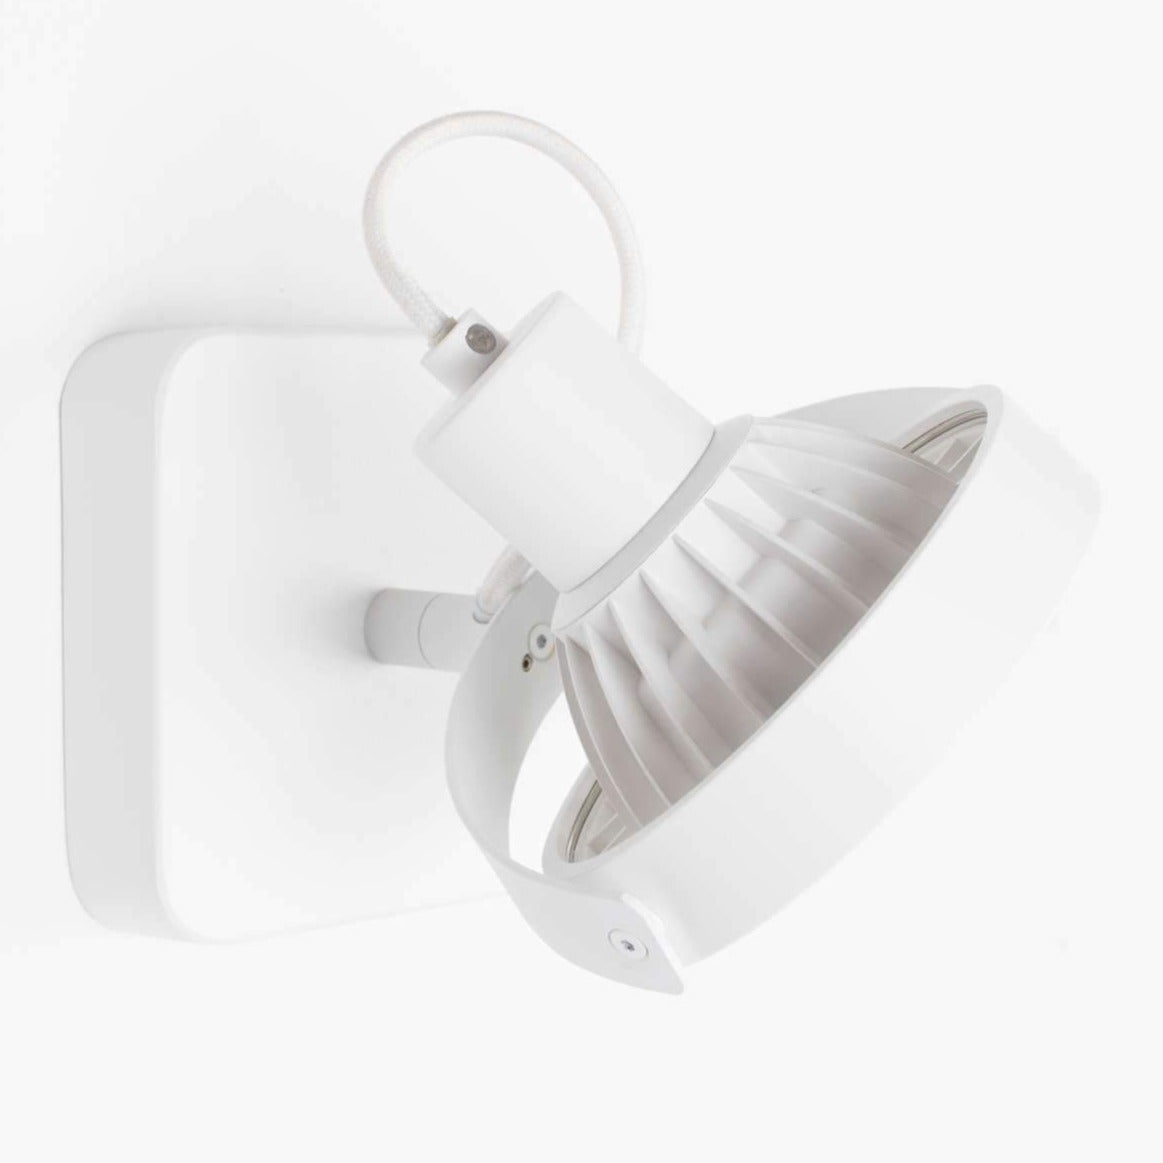 DICE-1 DTW point lamp white, Zuiver, Eye on Design